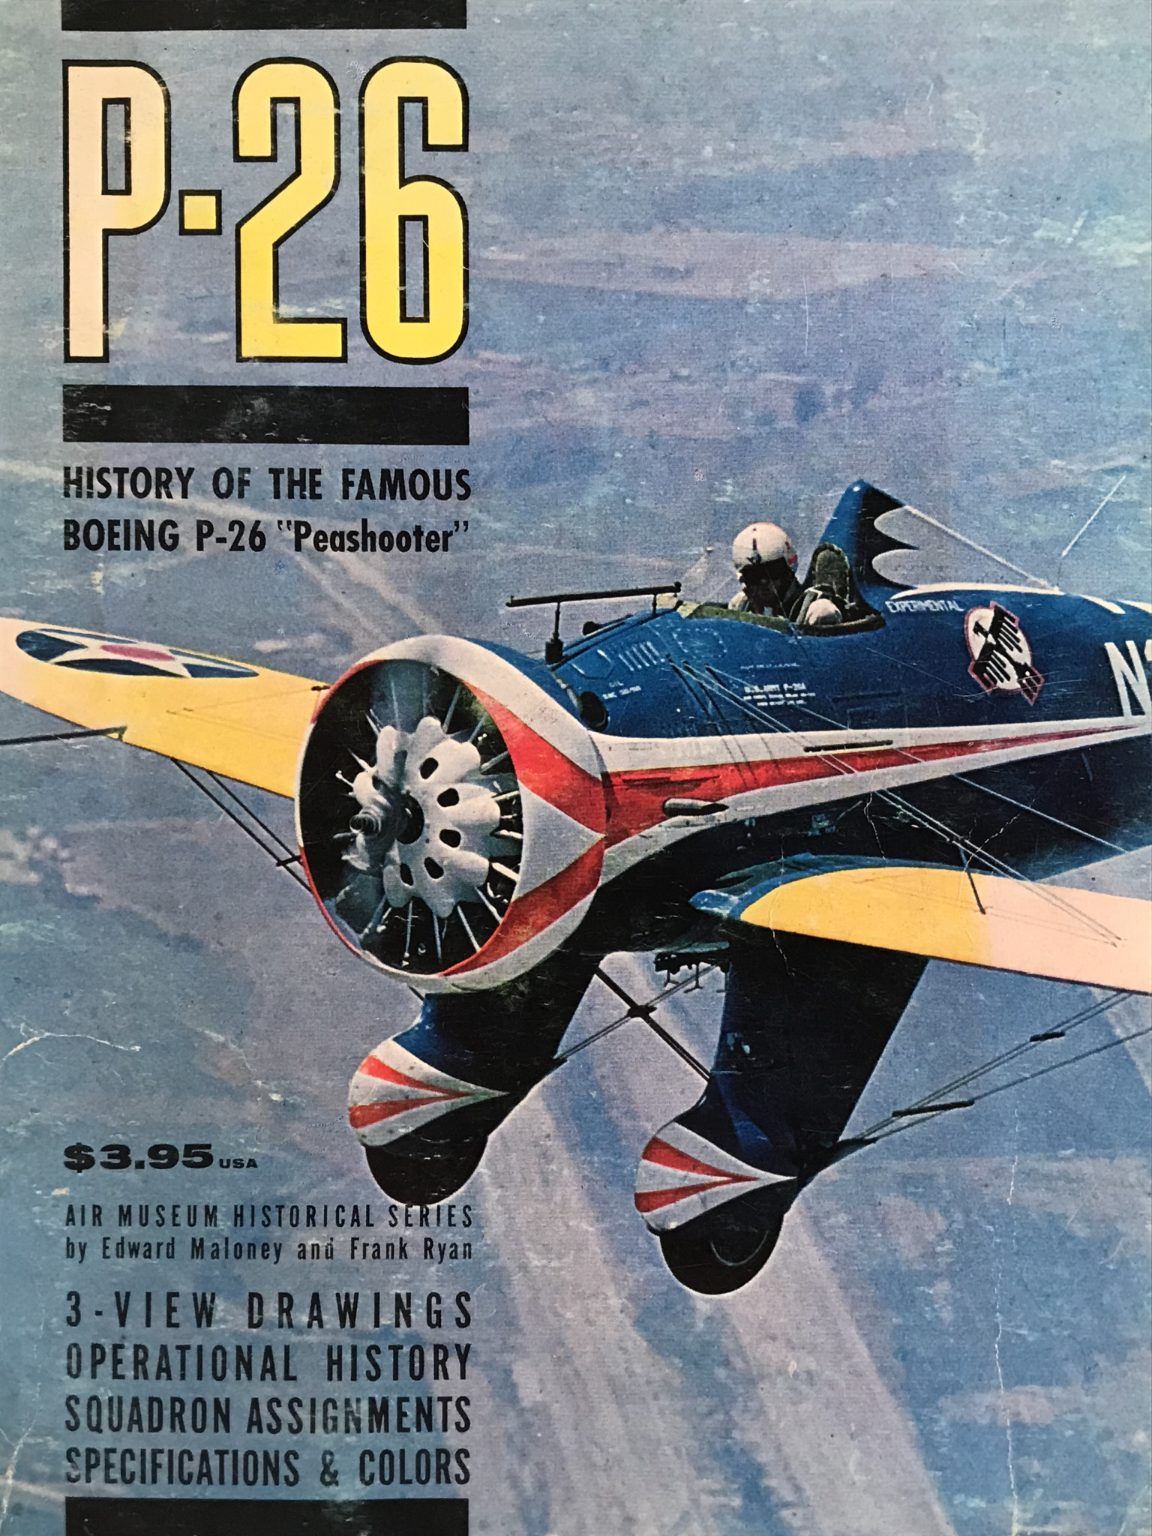 P-26: History of the famous Boeing P-26 Peashooter